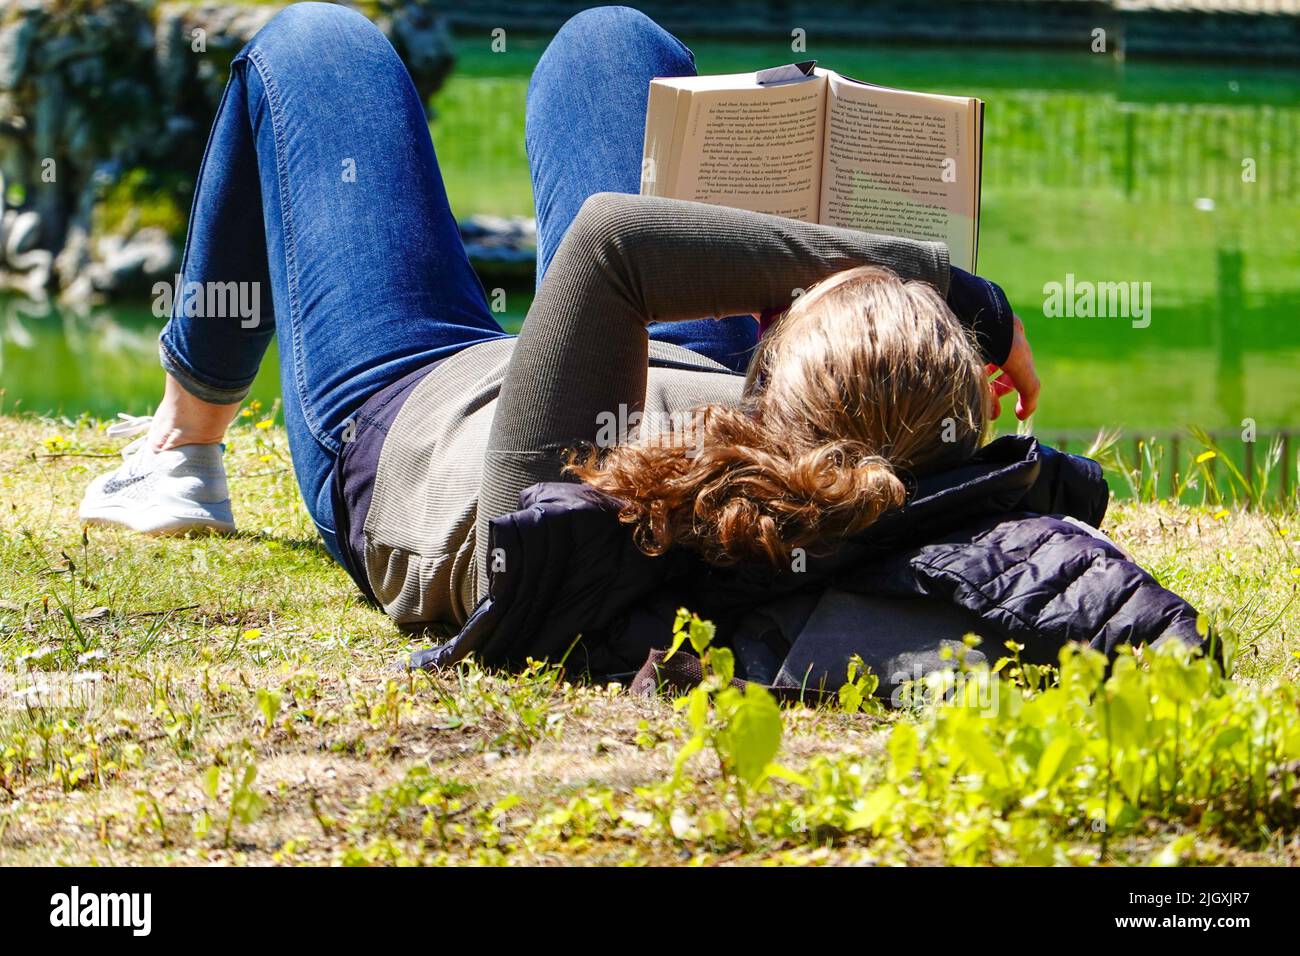 Young American woman, on grass with head propped on jacket, reading a novel, hard backed book. Enjoying a sunny Italian day in April with a good book. Stock Photo